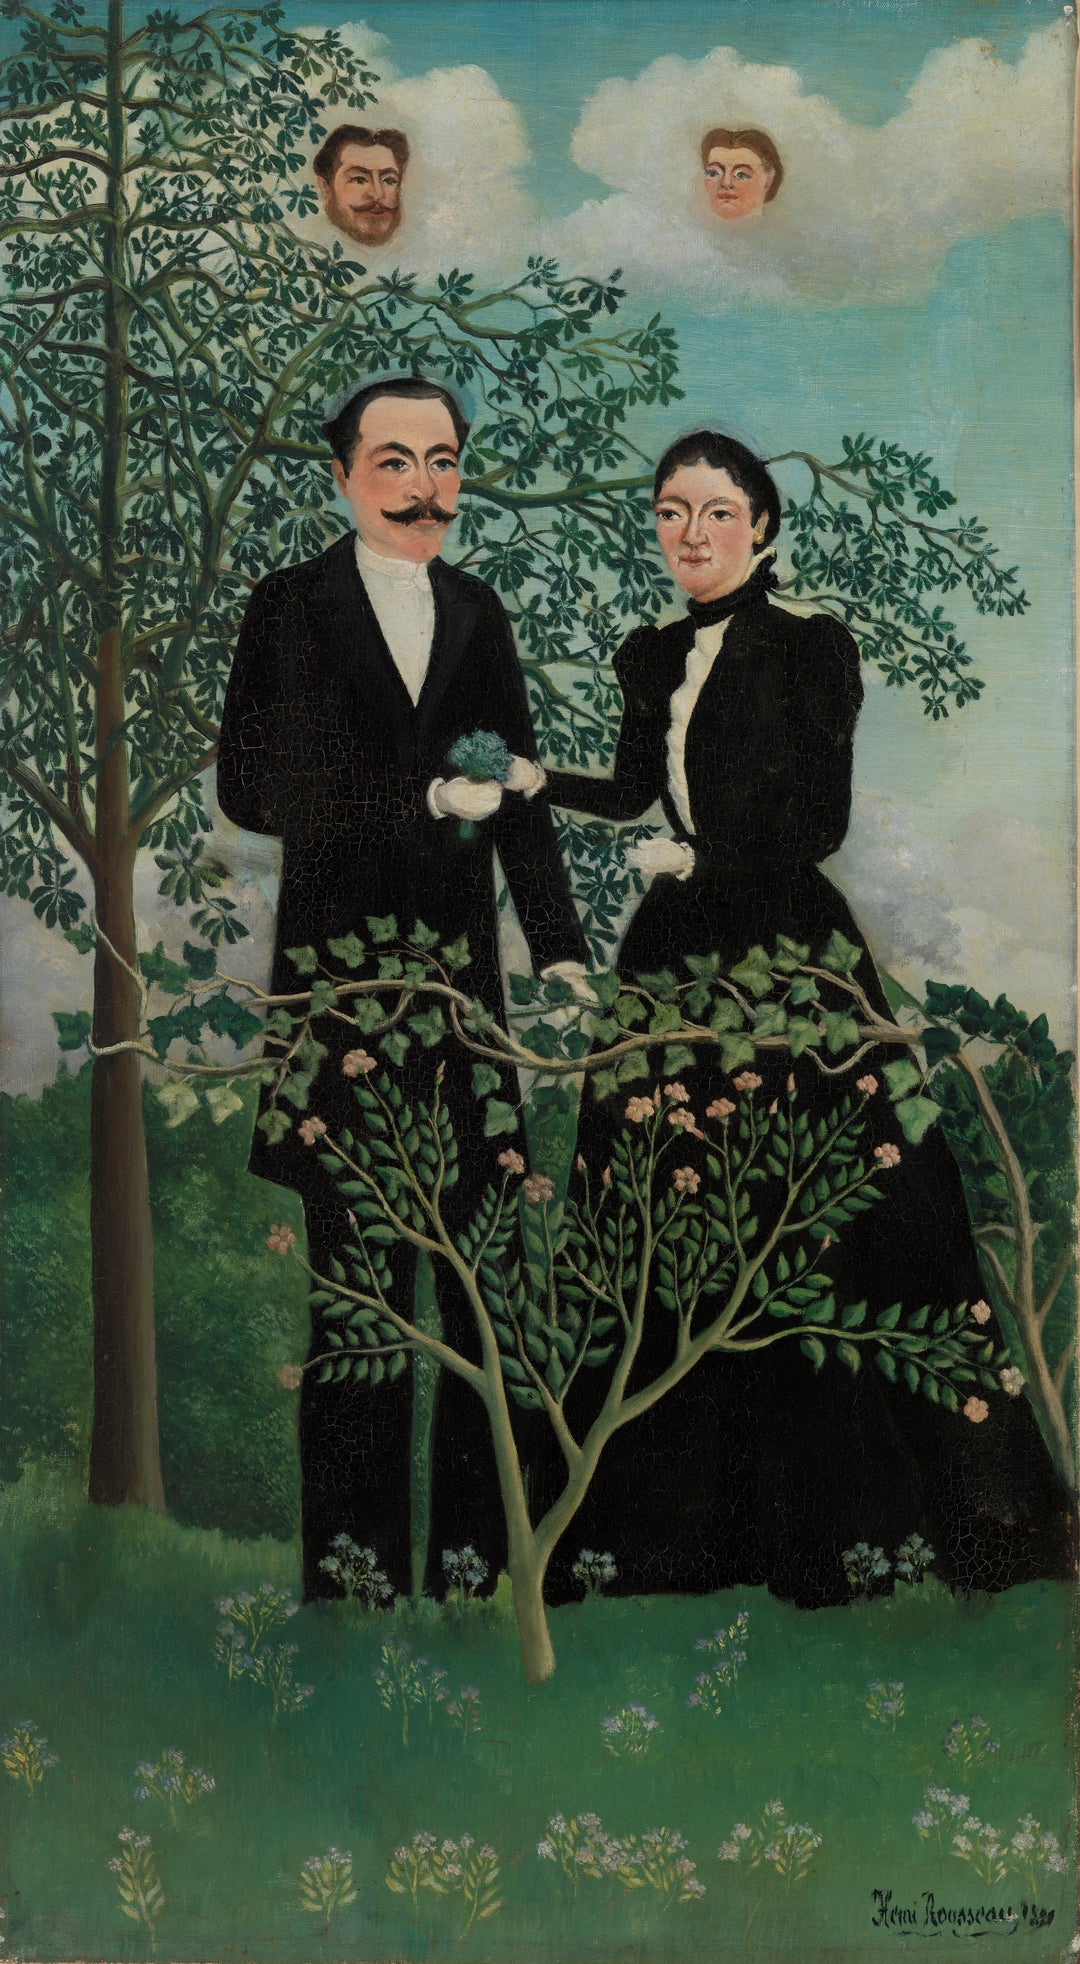 The Past and the Present or Philosophical Thought Henri Rousseau Wall Art Gift Canvas Art Painting